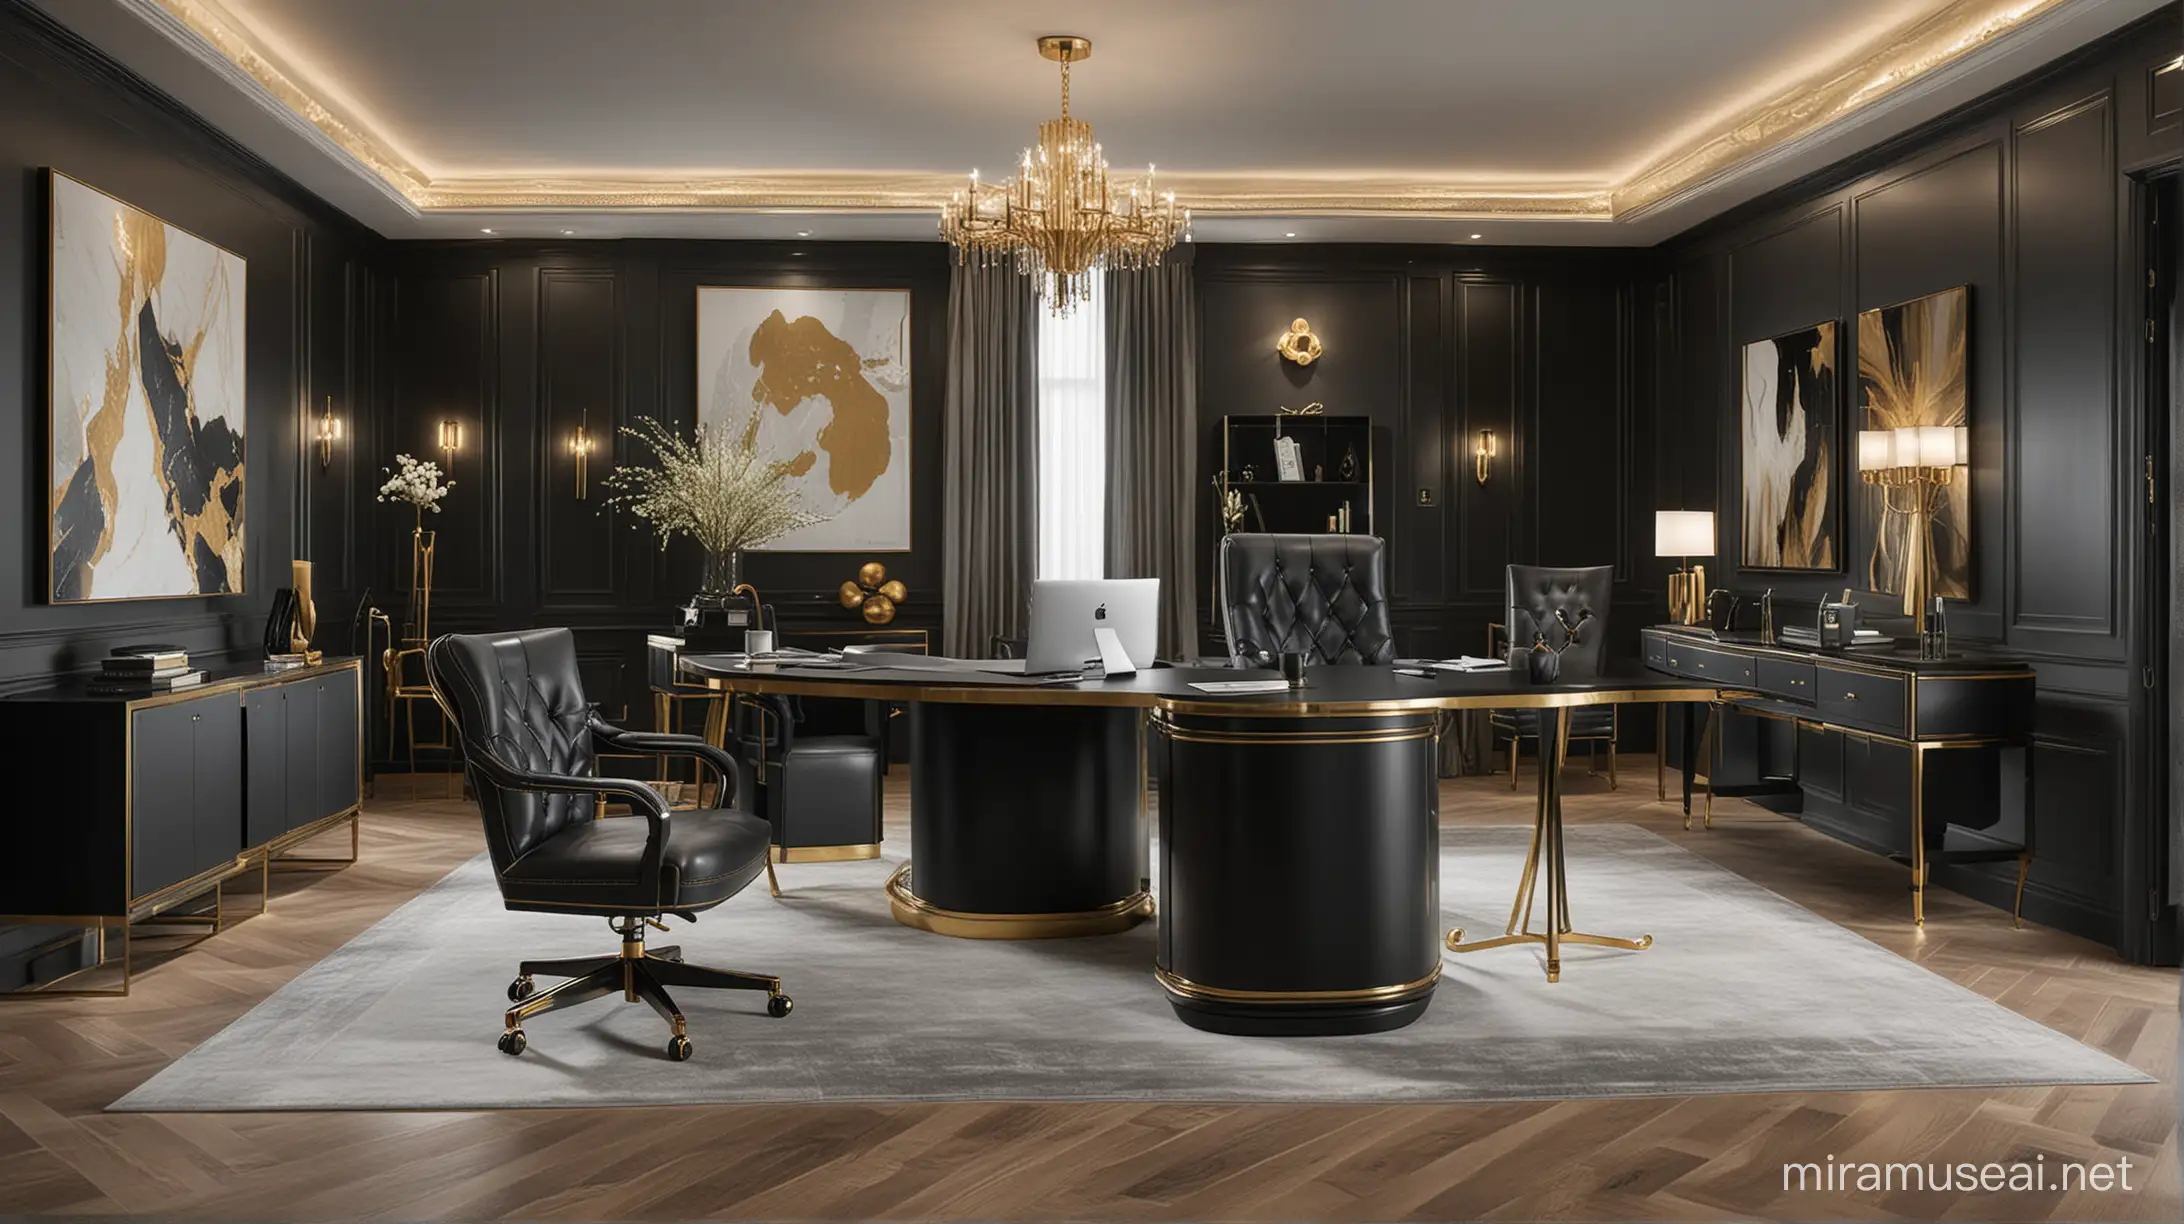 The powerful workspace is elegantly decorated with a color scheme of black, gray, and gold. A large desk made of high-quality wood, leather-upholstered chairs, and gold or silver accents create an aura of sophistication. Lighting is designed to maintain a serious and dignified atmosphere, while premium amenities such as sound systems and large display screens ensure comfort and efficiency in work.